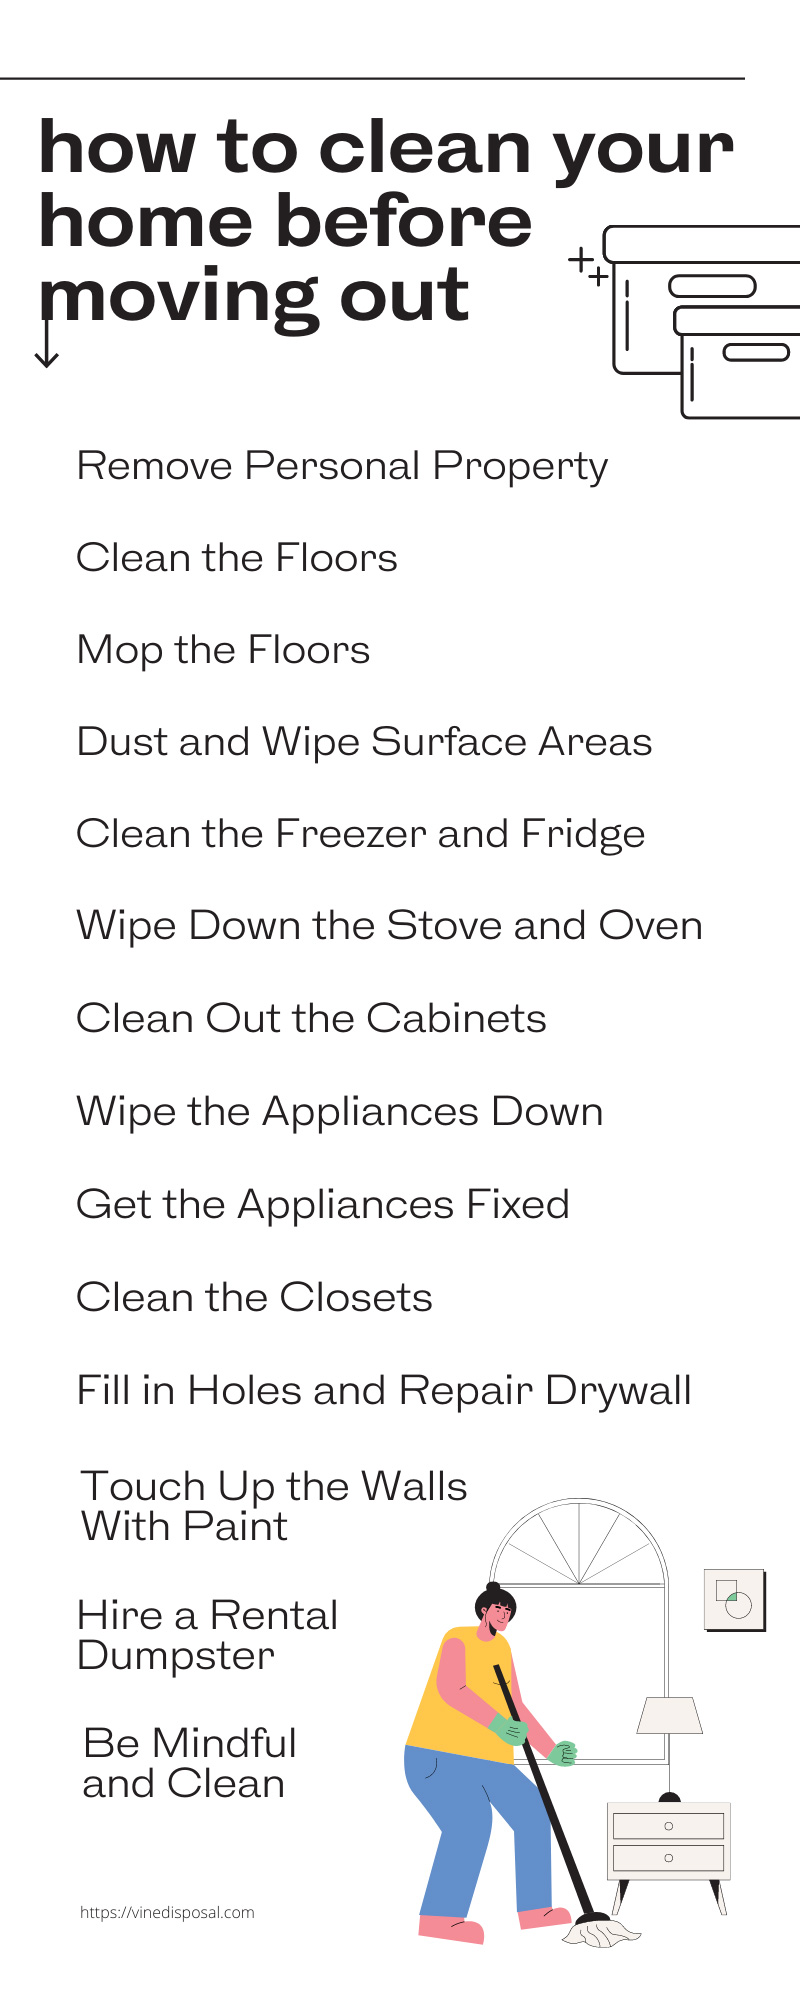 How To Clean Your Home Before Moving Out